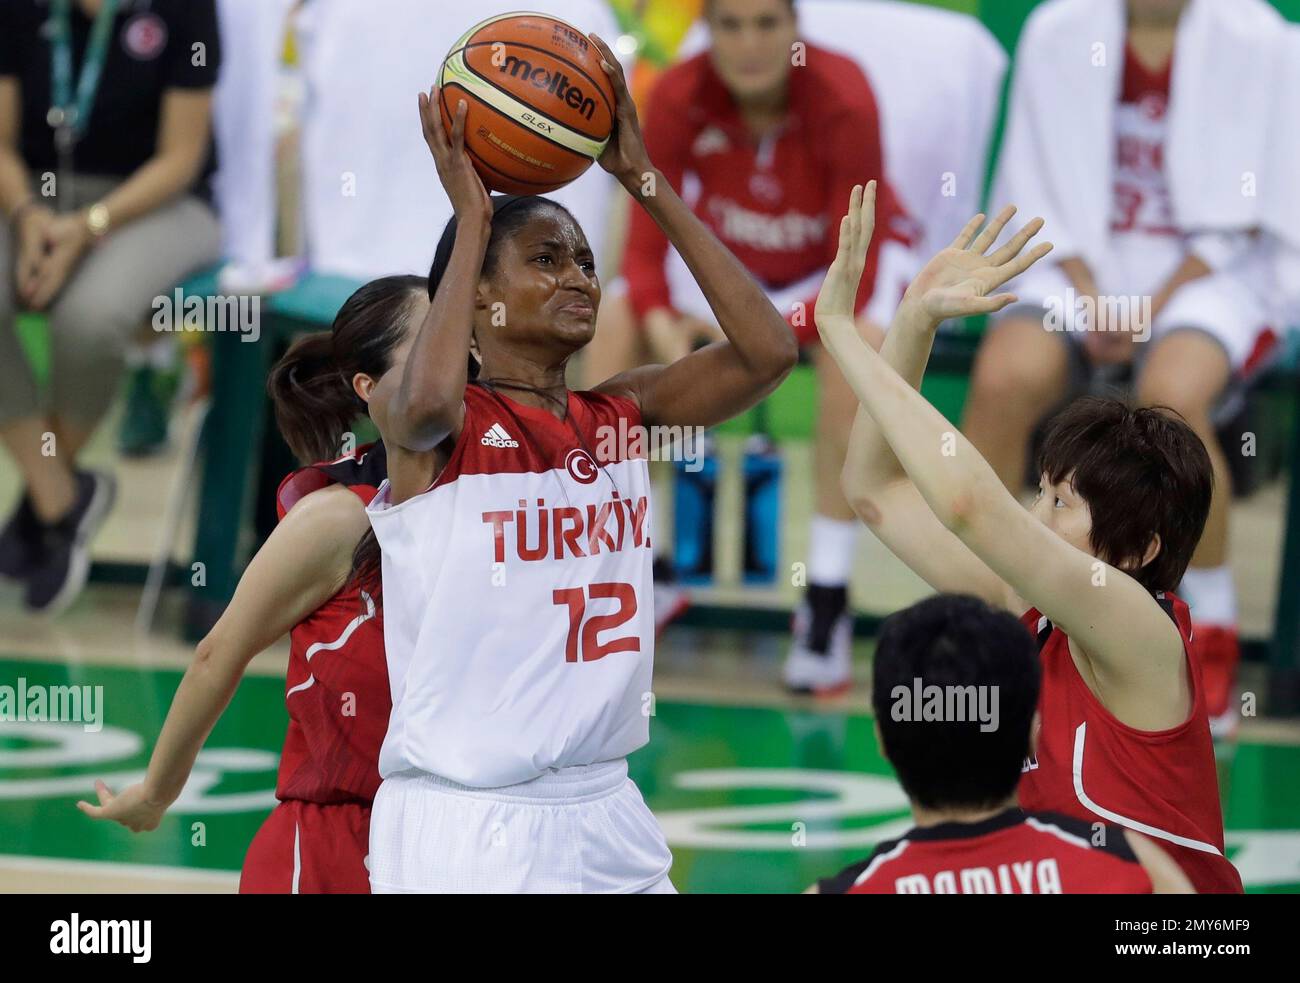 Turkey center Lara Sanders (12) shoots during the second half of a women's  basketball game against Japan at the Youth Center at the 2016 Summer  Olympics in Rio de Janeiro, Brazil, Tuesday,